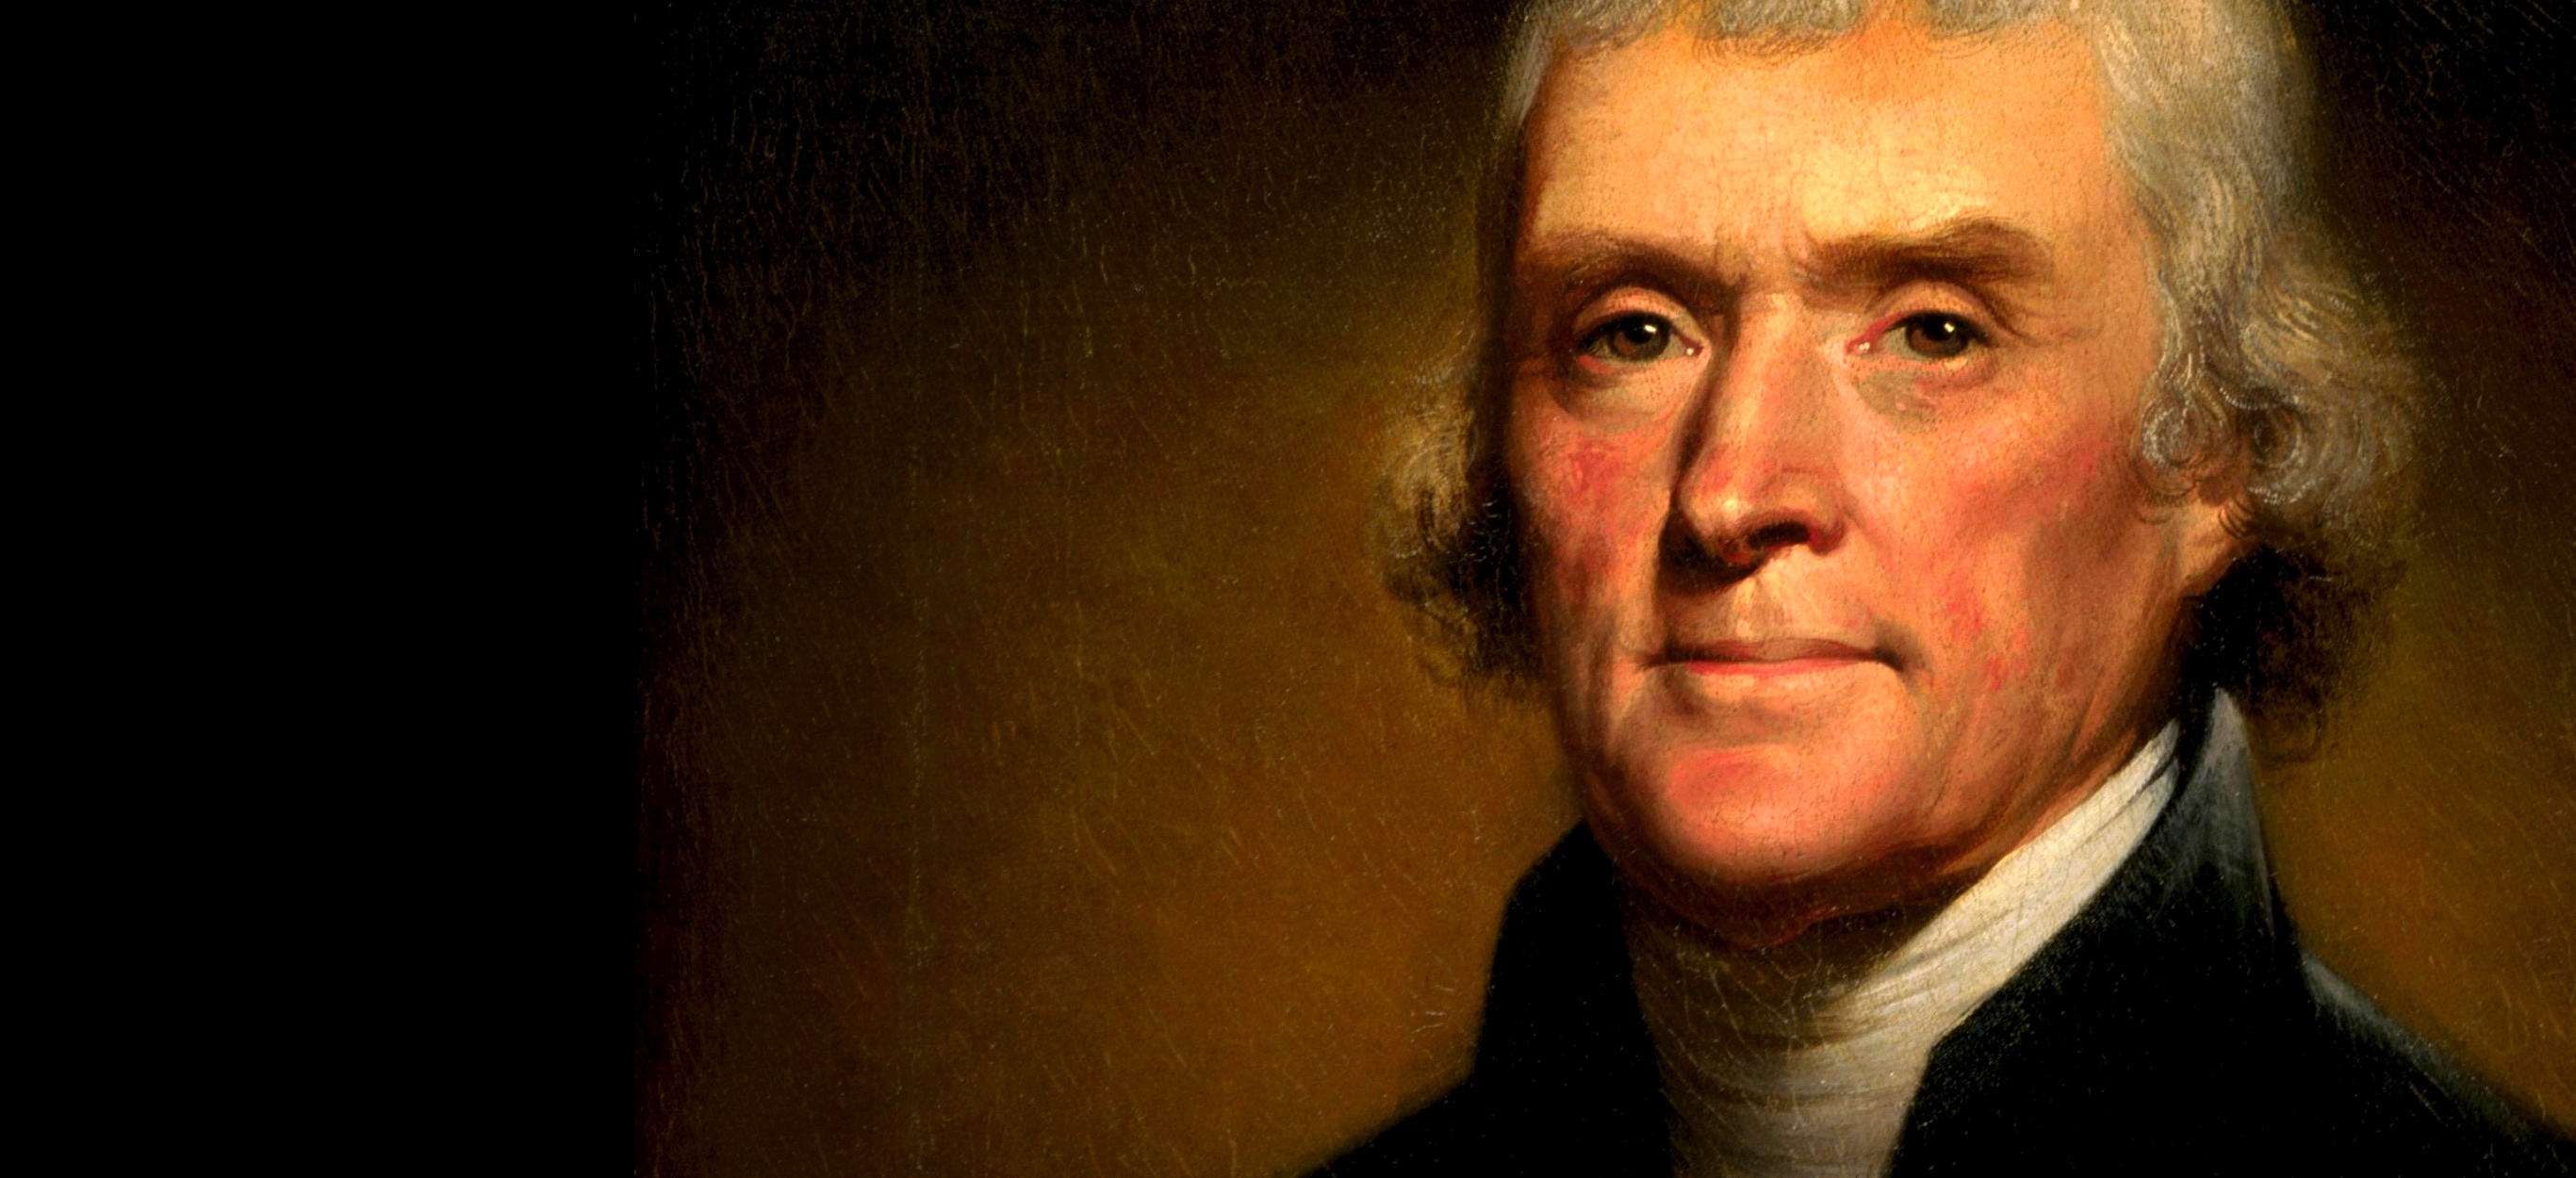 Gallery For Thomas Jefferson Backgrounds